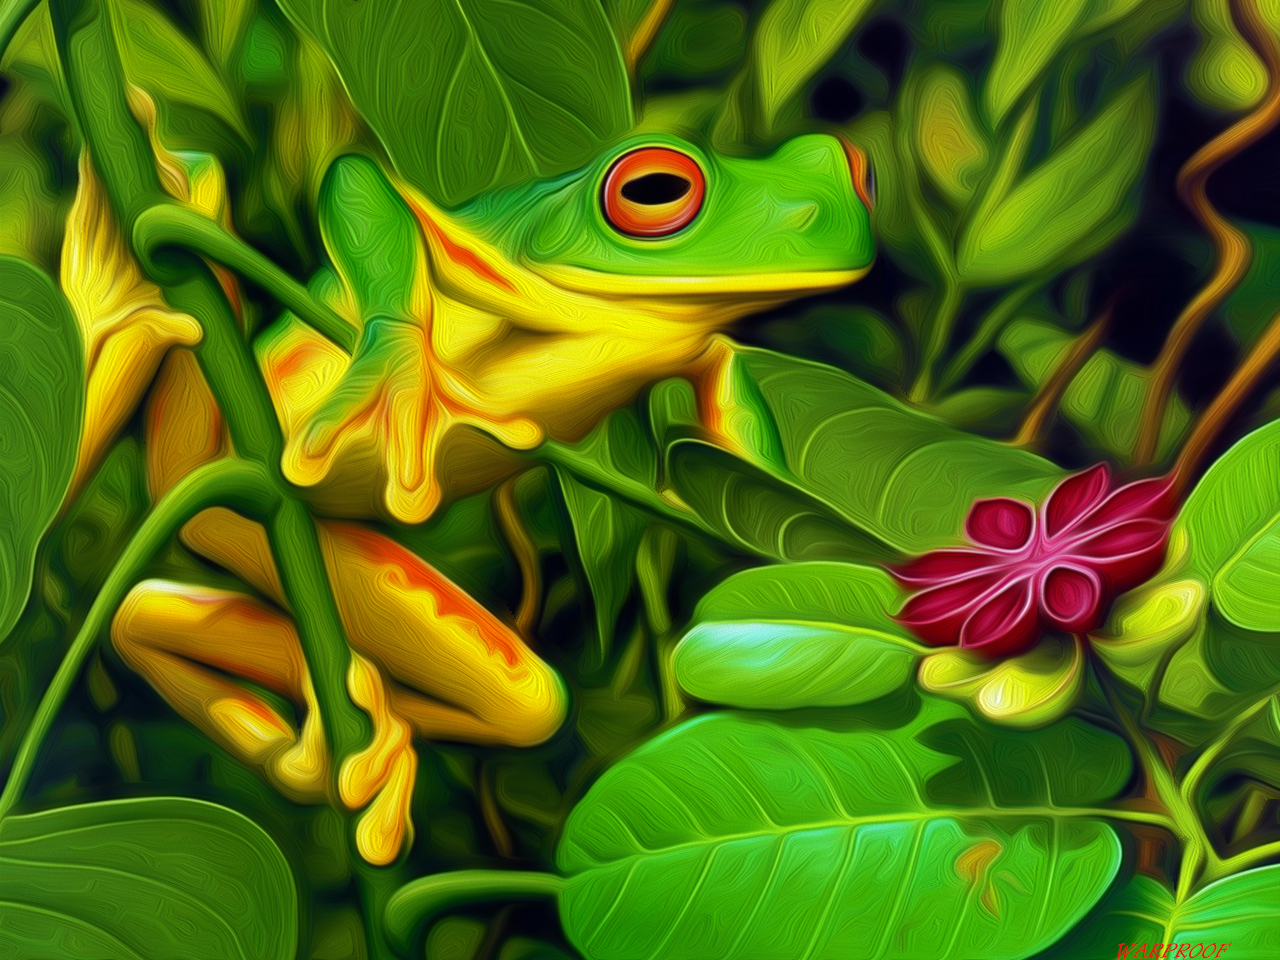 TREE FROG Wallpaper and Background 1280x960 ID441788